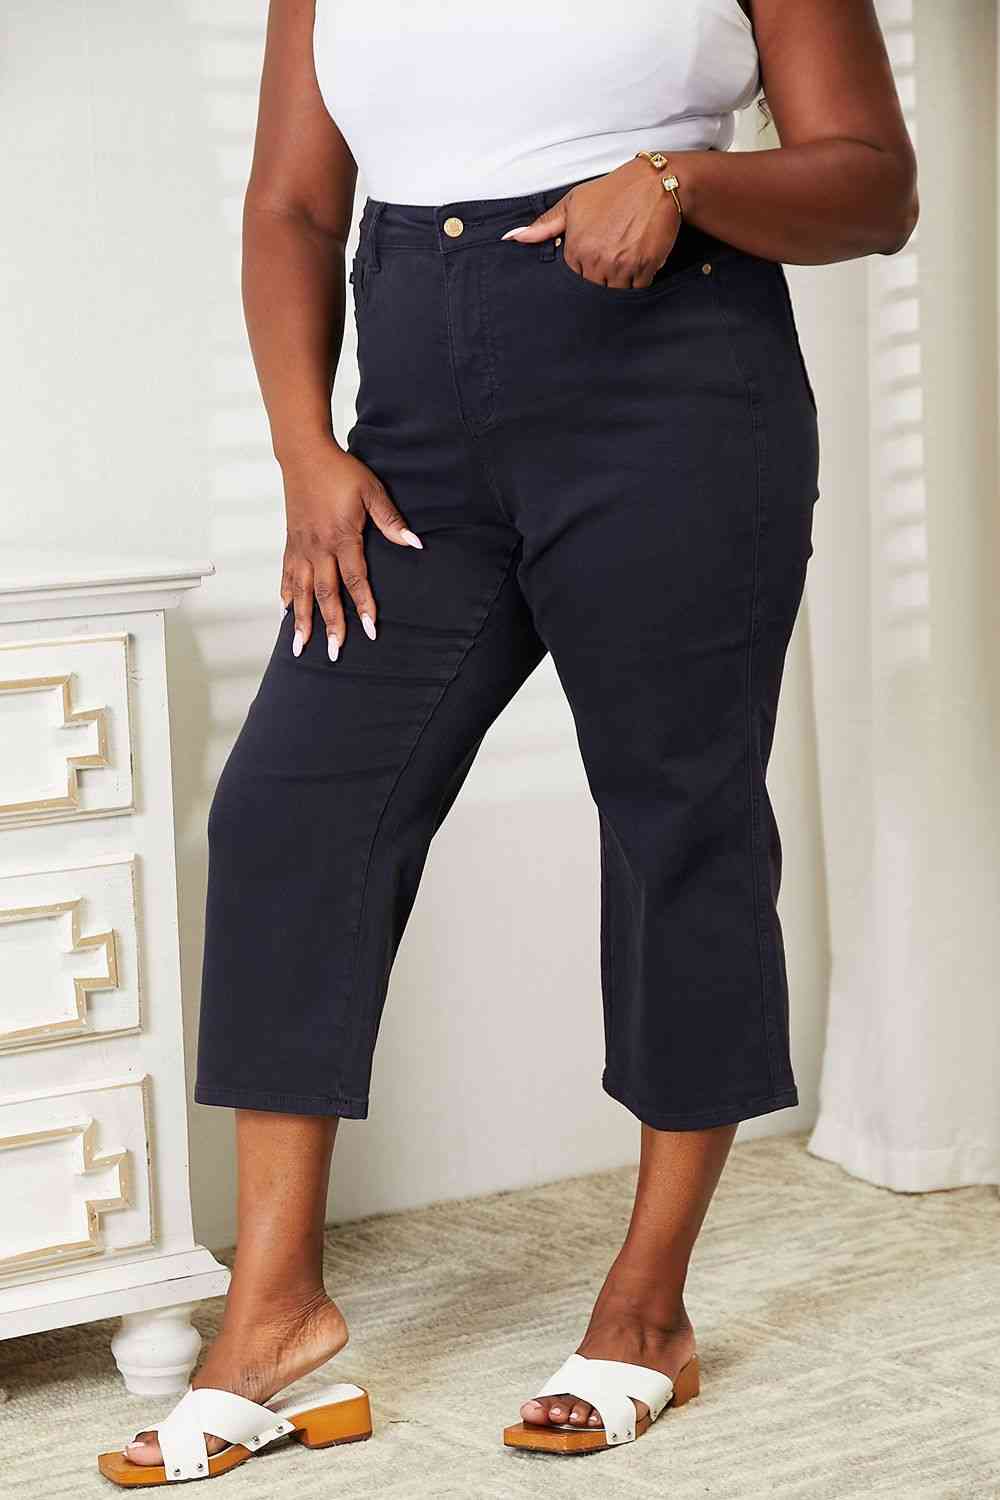 These crop jeans seamlessly combine modern style with body-enhancing features. Engineered with tummy control technology, these jeans provide a slimming effect while offering comfortable support. The high waist design flatters the figure and elongates the silhouette.